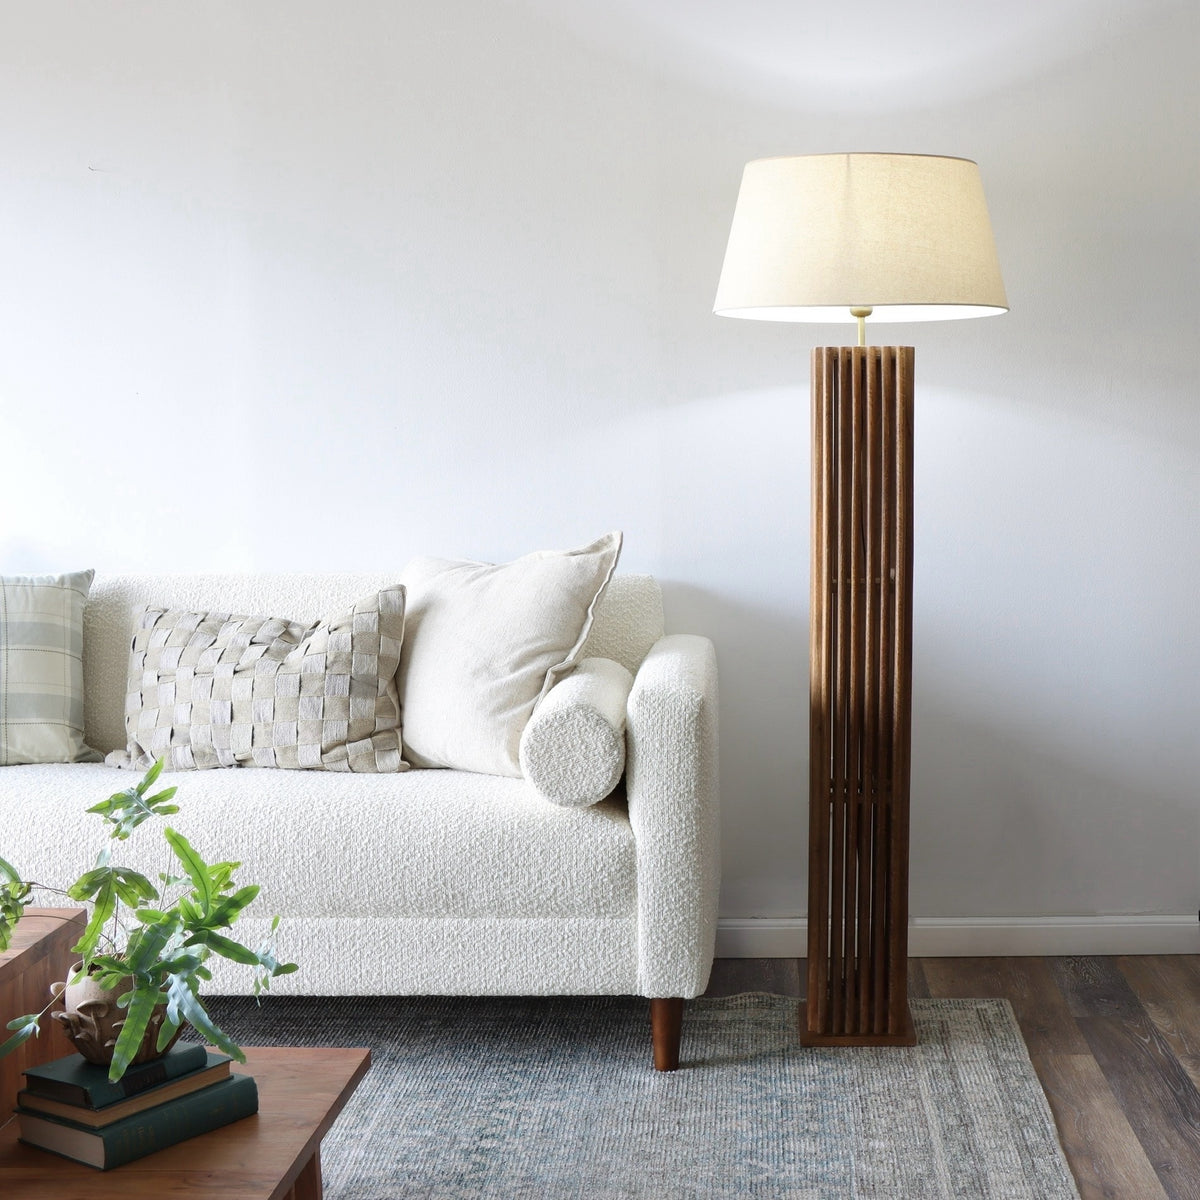 Tambour Spindle Wooden Floor Lamp with Shade - Holistic Habitat 